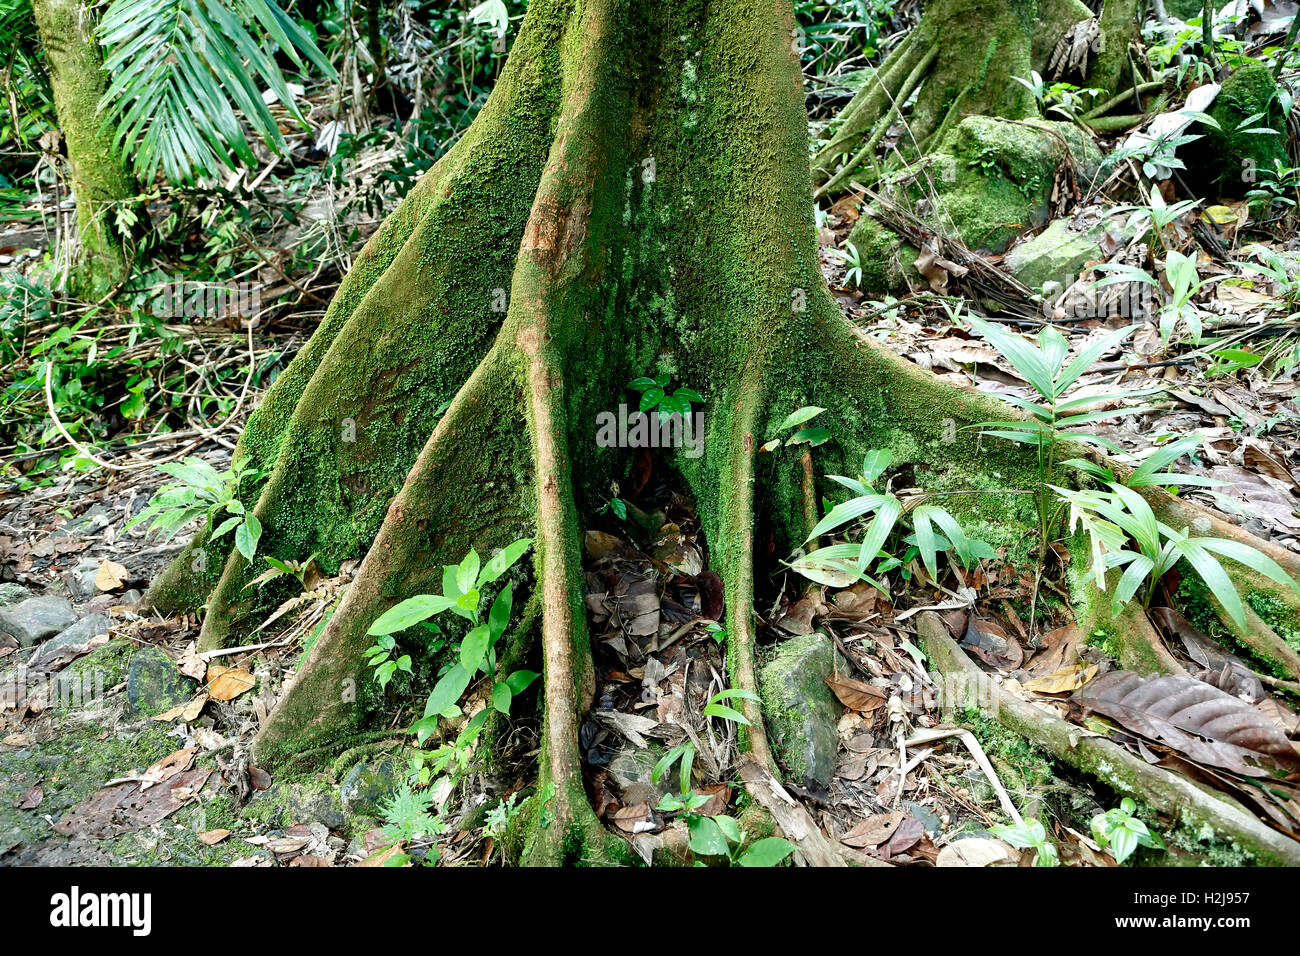 Ceiba tree roots, Caribbean National Forest (El Yunque Rain Forest), Puerto Rico Stock Photo